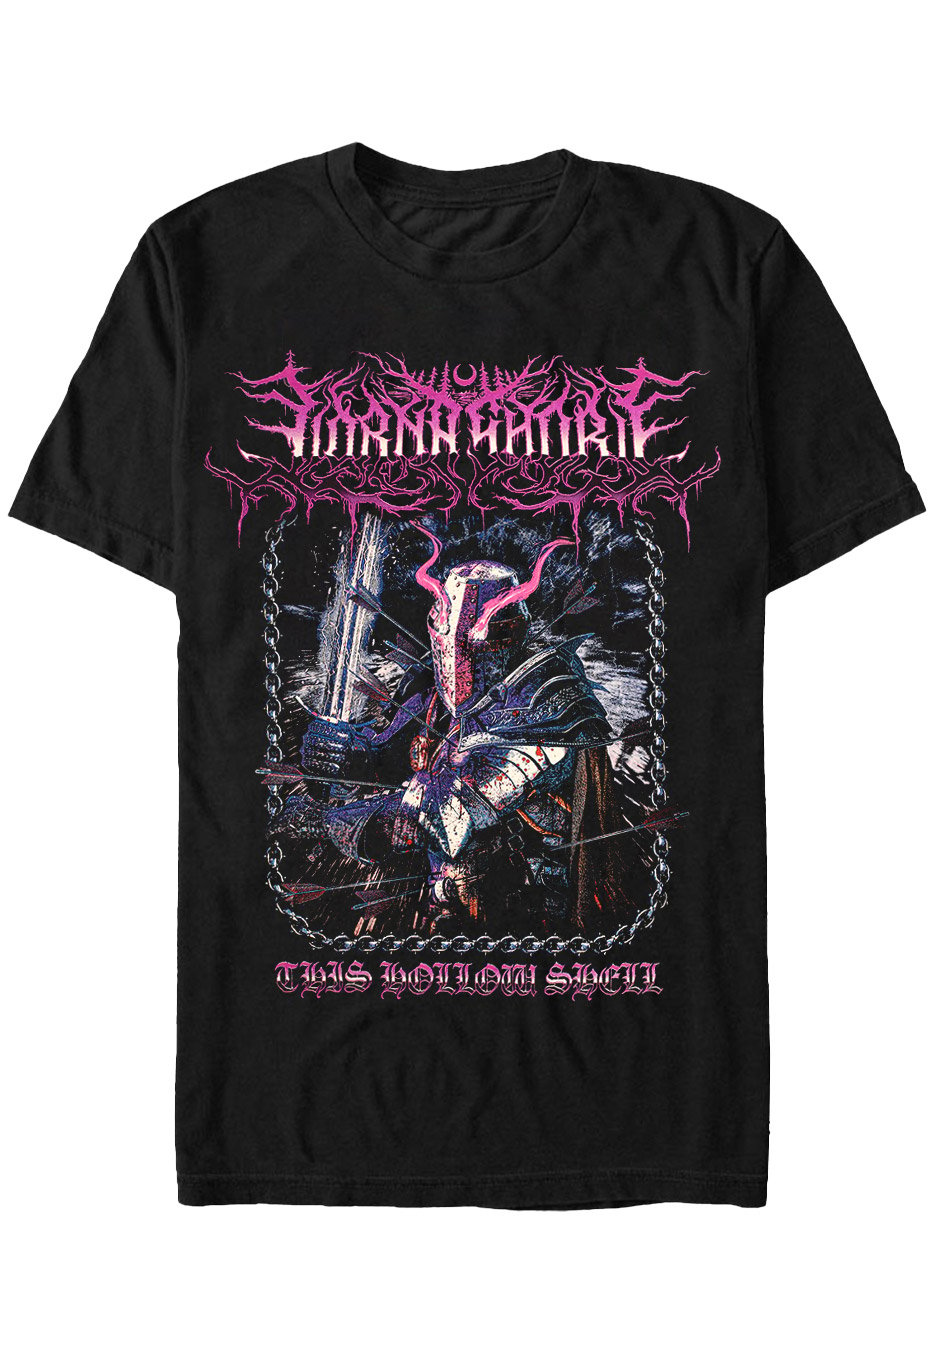 Lorna Shore - Soulless Existence - T-Shirt